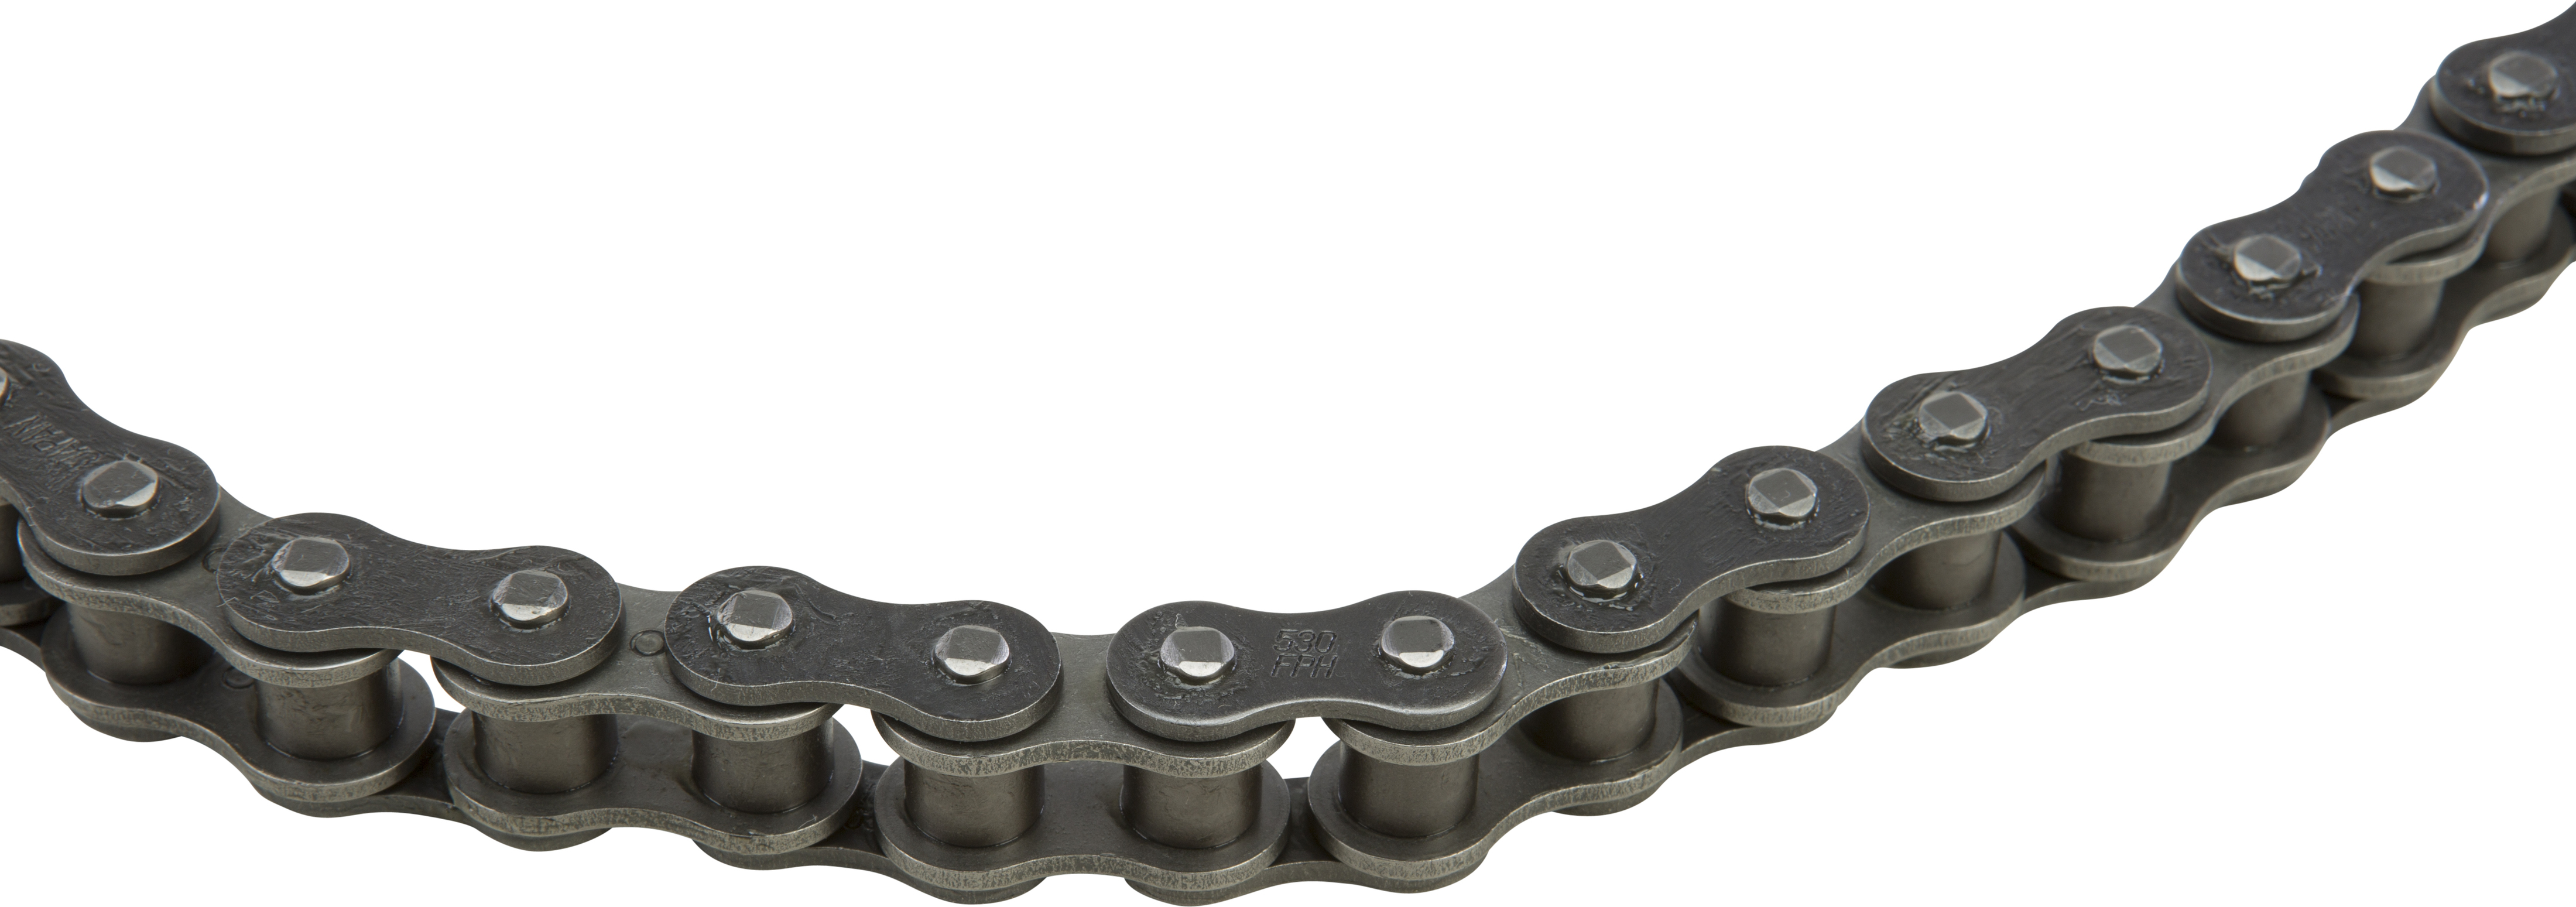 Heavy Duty Roller Chain 530 Pitch X 114 Links - Click Image to Close